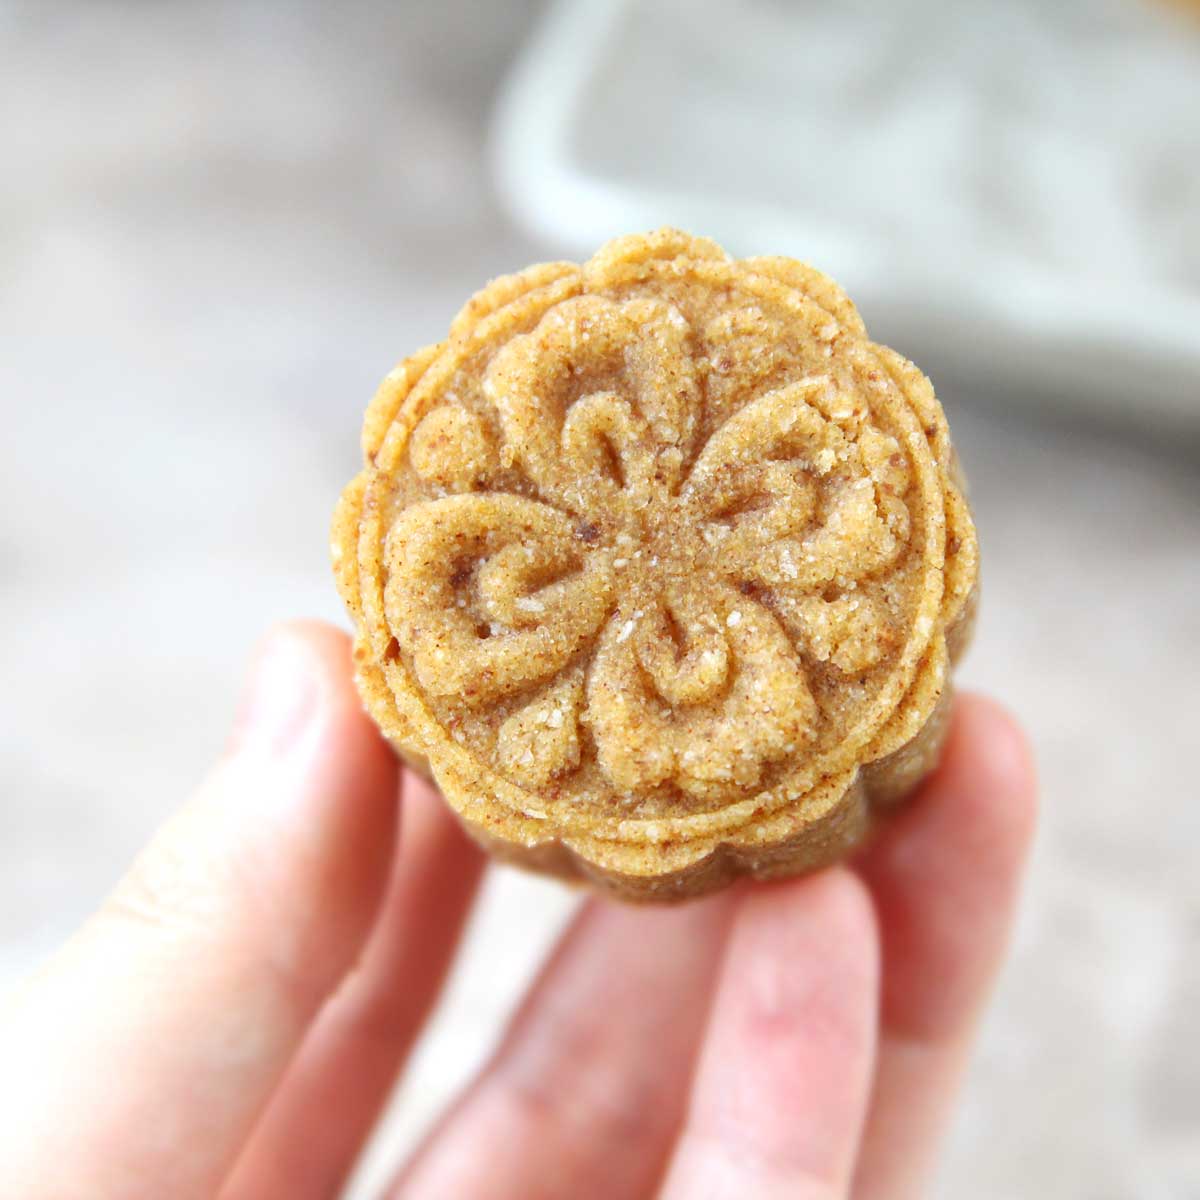 Easy Asian "Chestnut" Cakelets (Applesauce Cakes Made w/ Whole Wheat) - applesauce cake